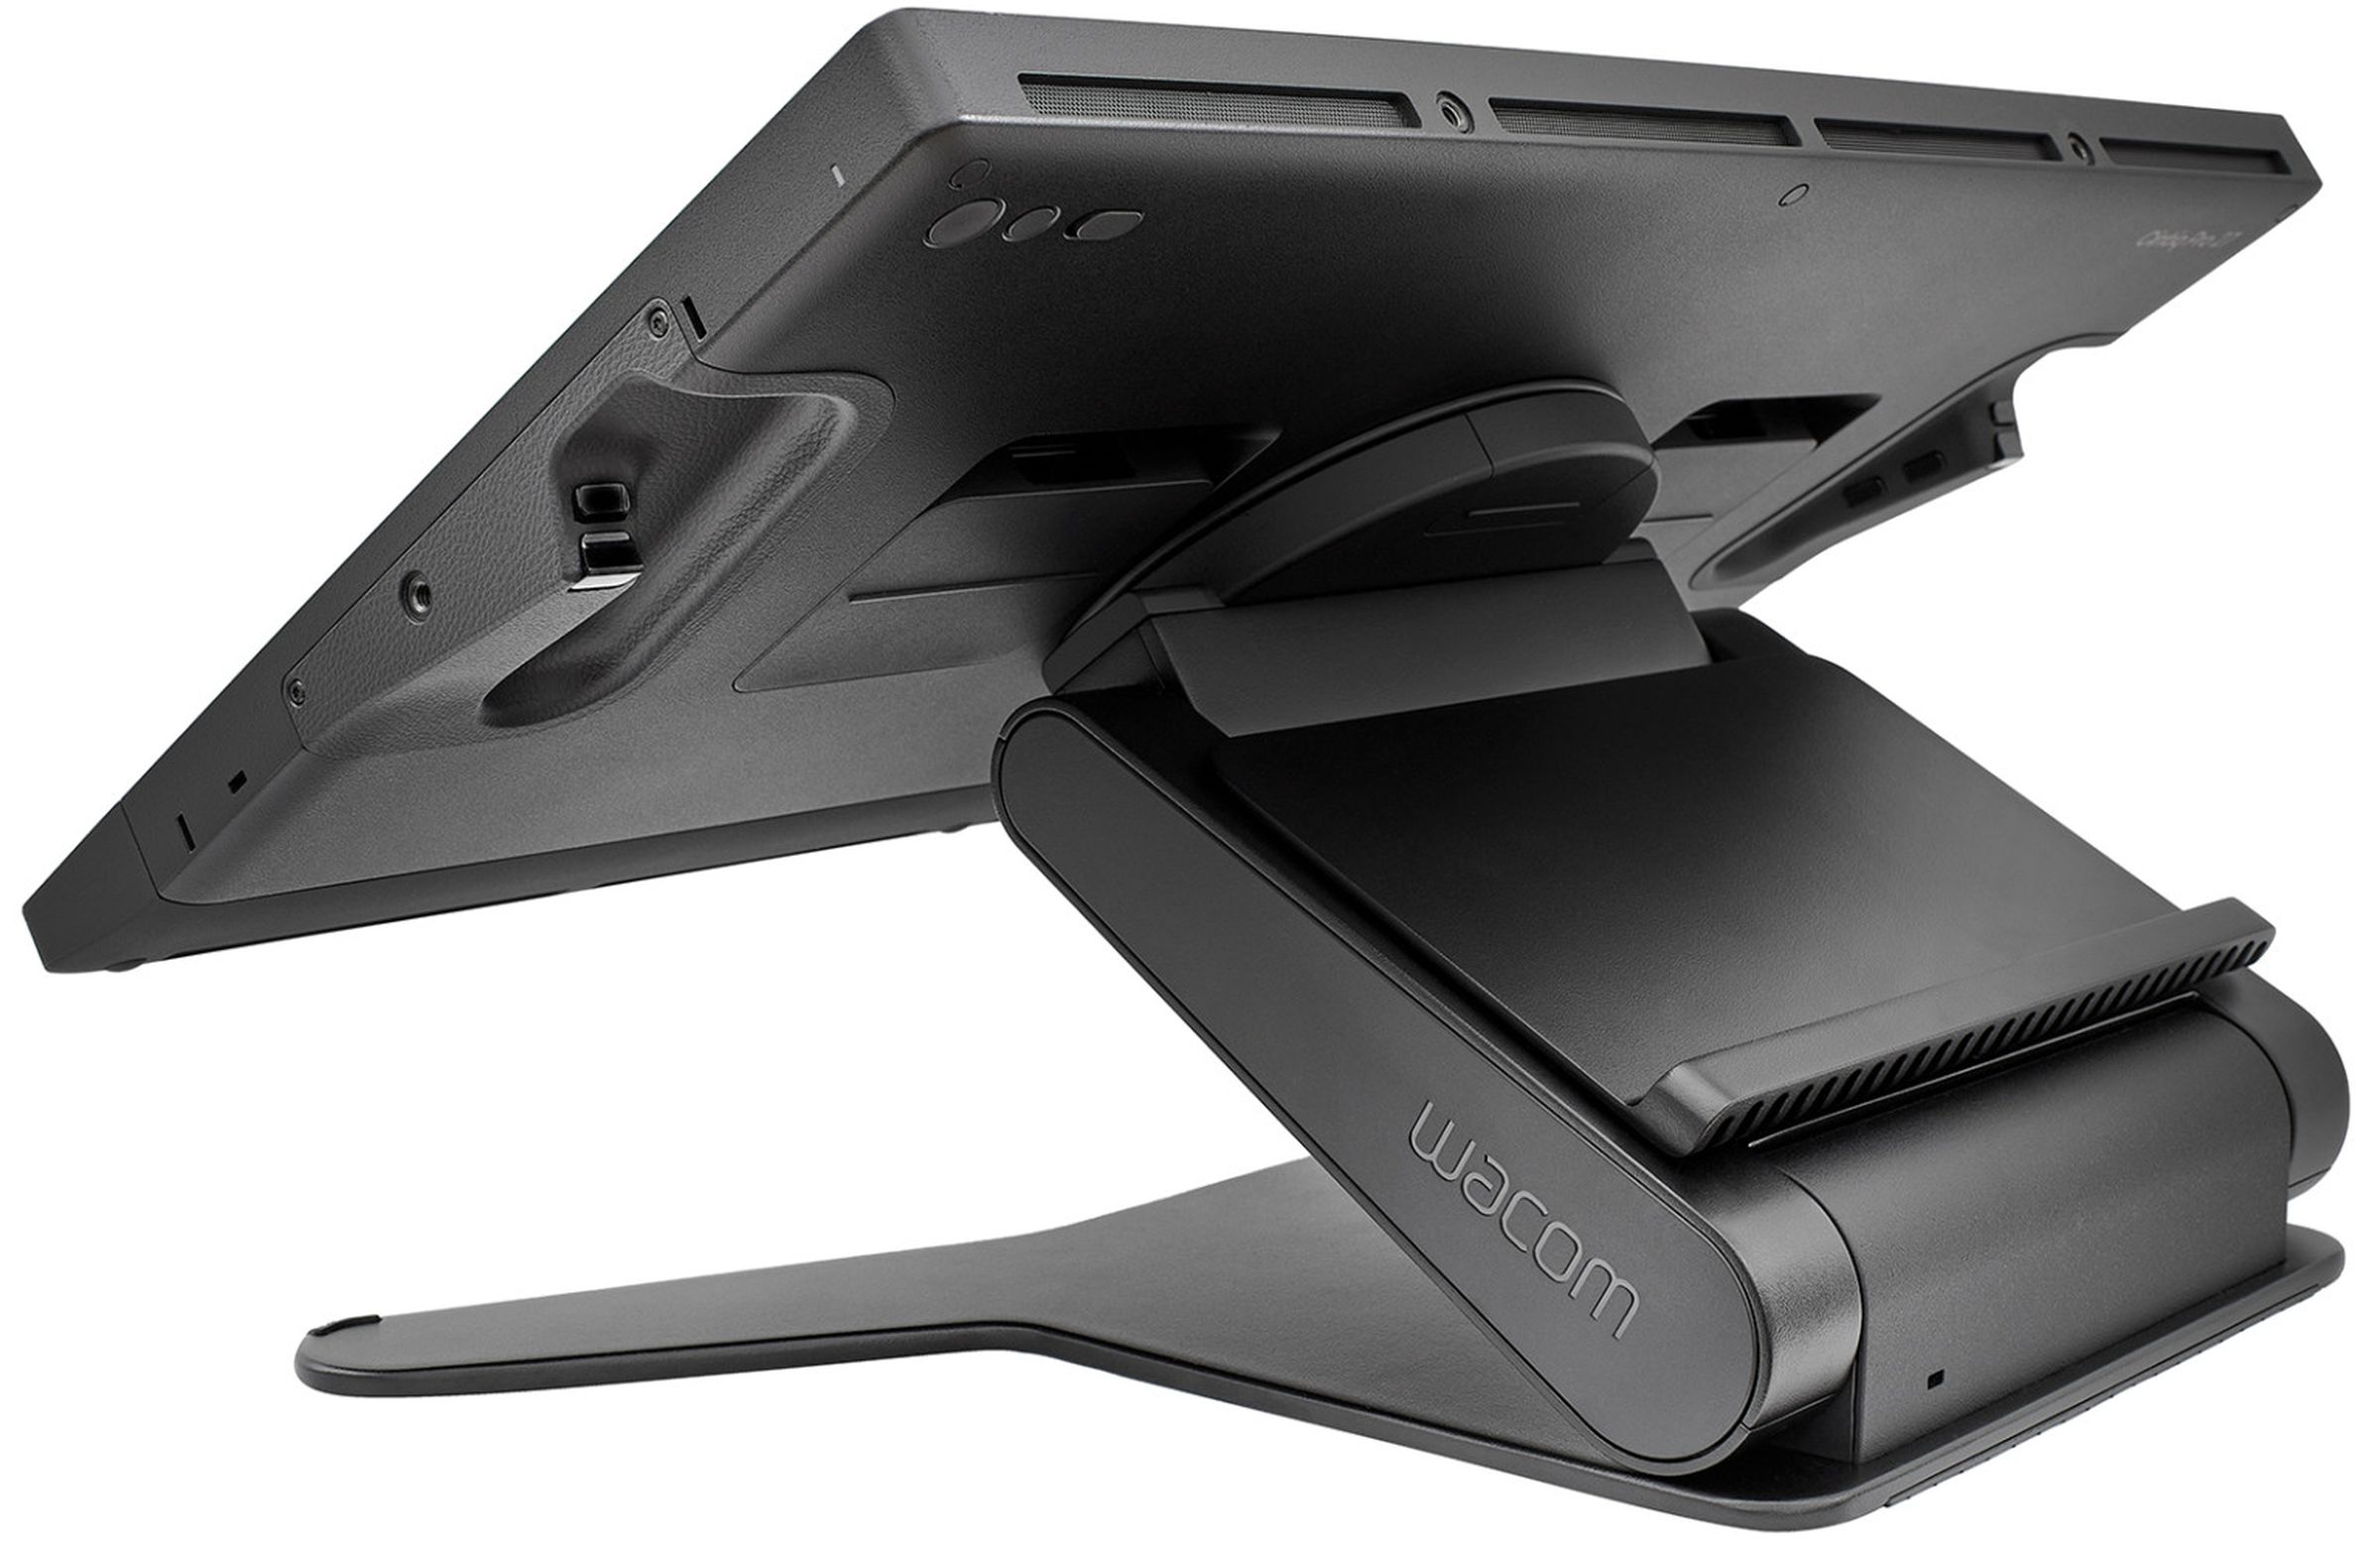 <em>The Cintiq Pro 27 may look like a typical computer display from the front, but it can be maneuvered into various positions.</em>